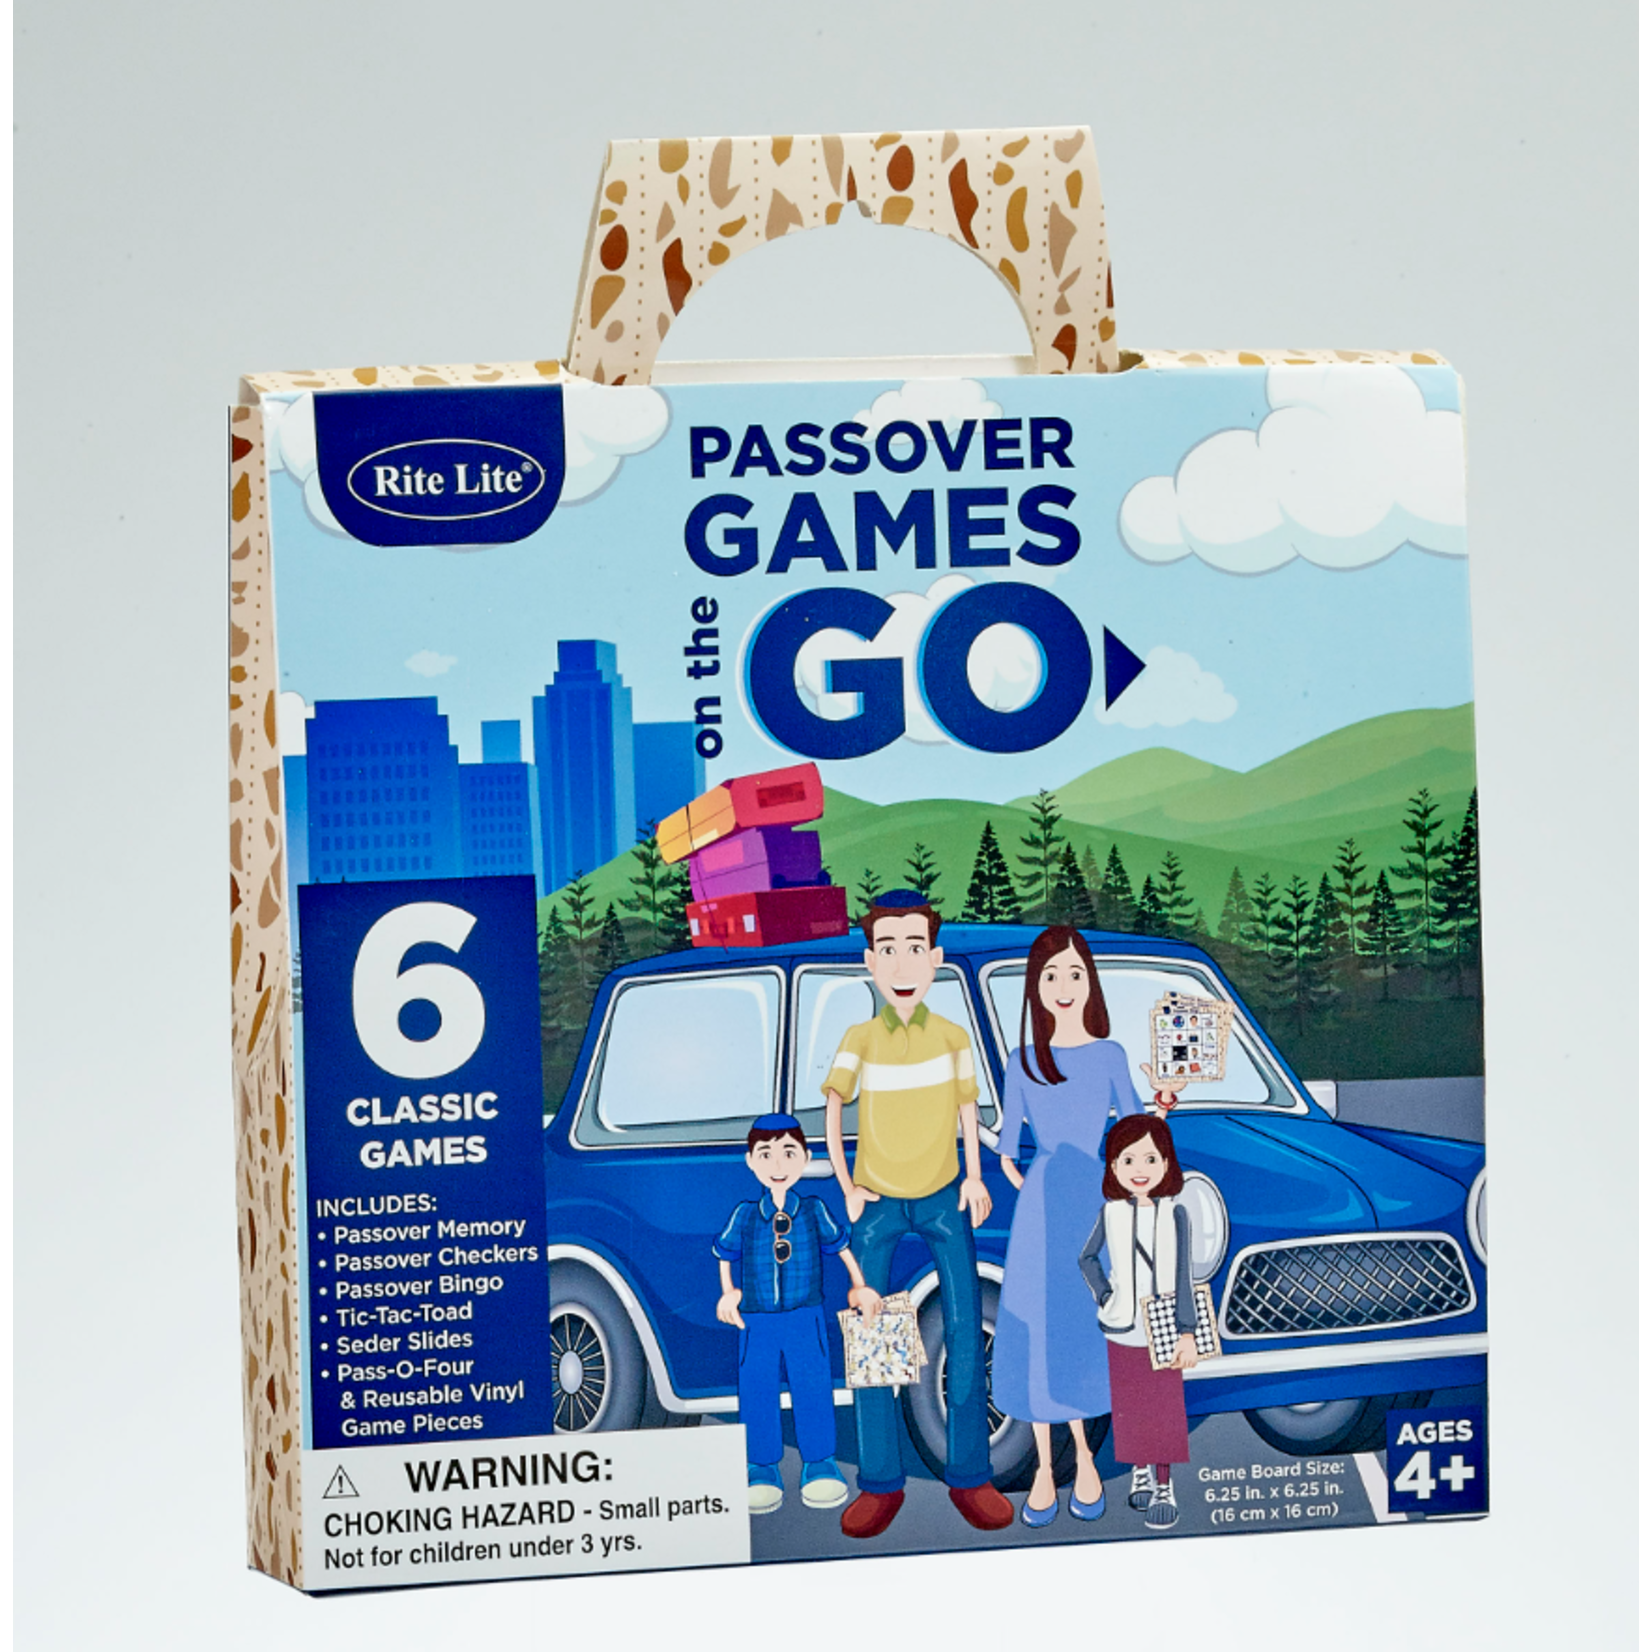 Passover "Games On-The-Go"